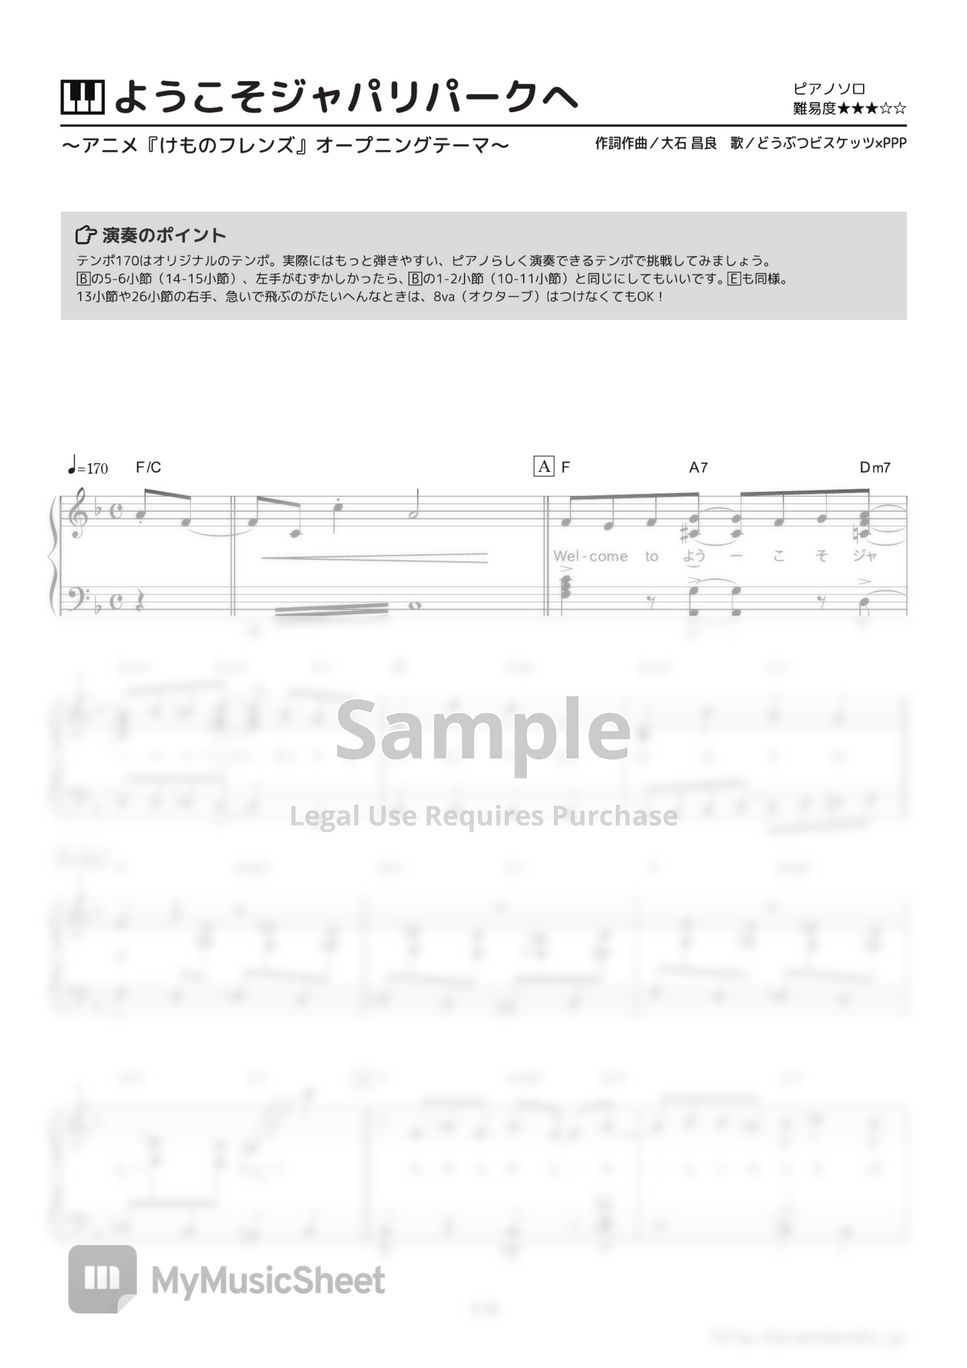 Doubutsu Biscuits x PPP - Welcome to Japari Park (Openig theme song of 『Kemono Friends』) by PianoBooks